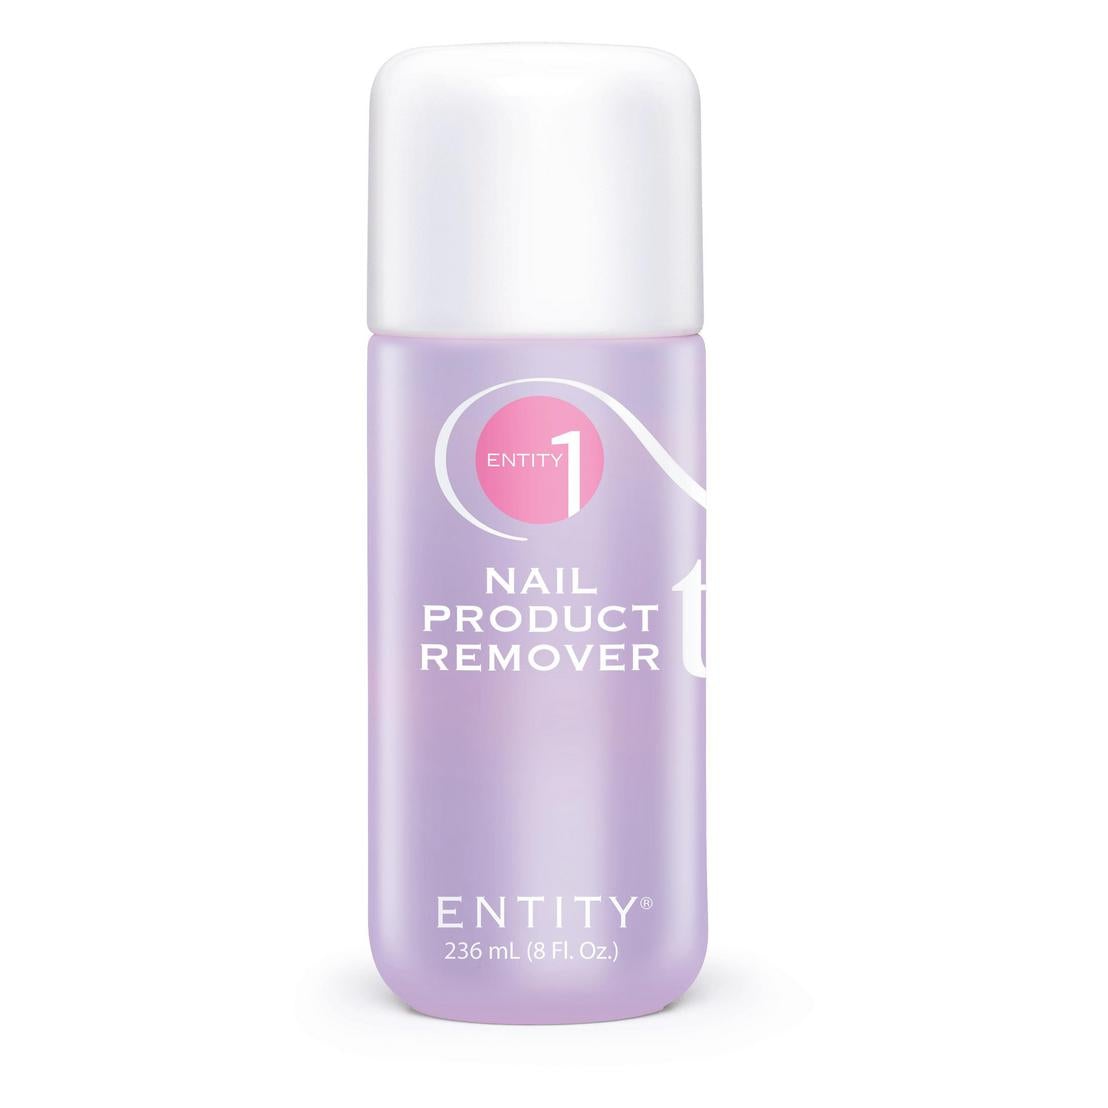 Entity Nail Product Remover 8 oz